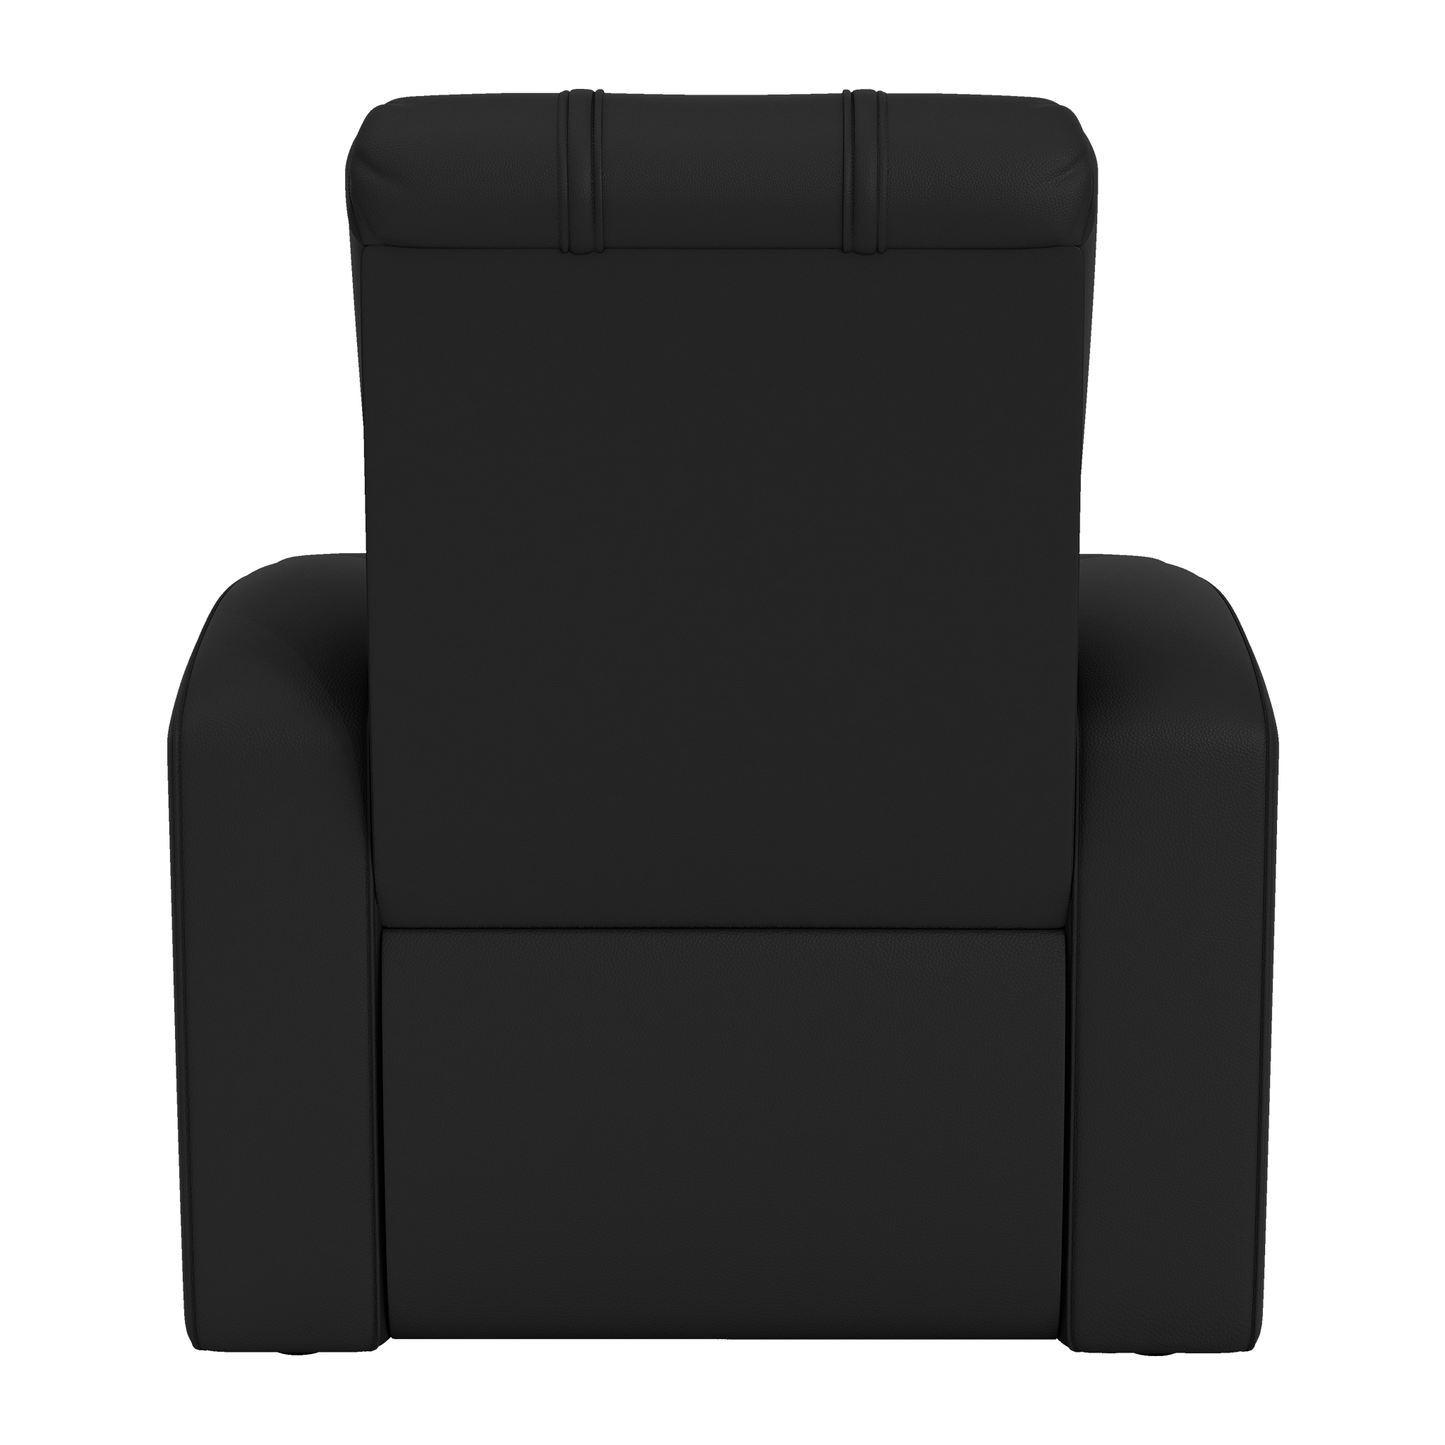 Relax Home Theater Recliner with Pittsburgh Panthers Logo